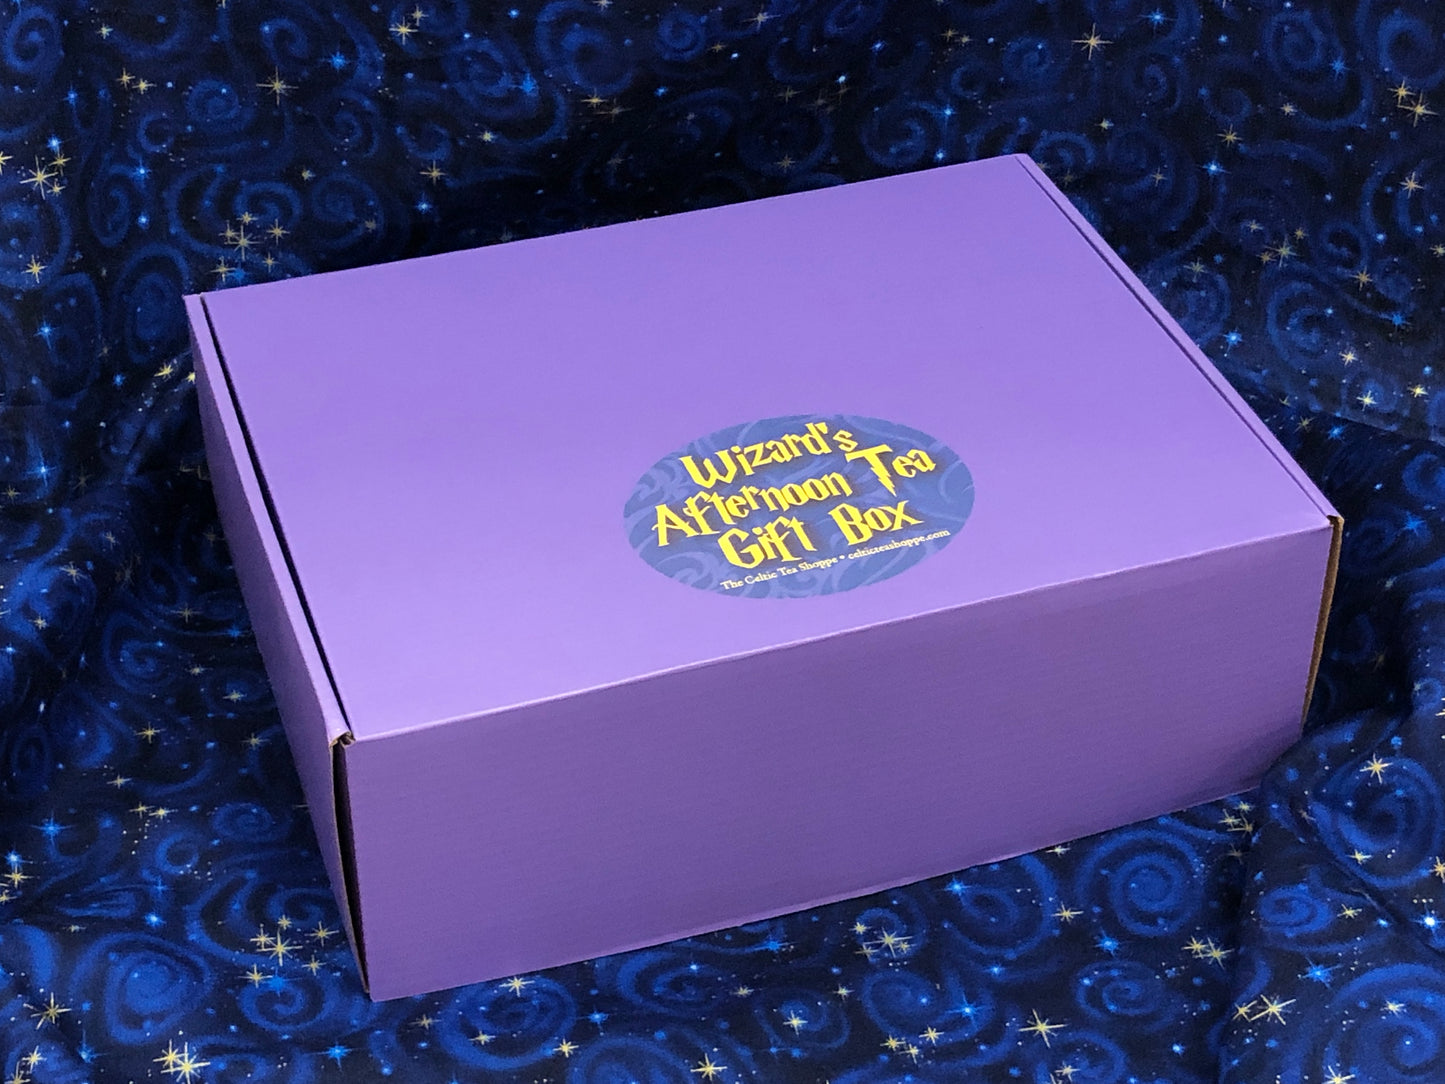 Wizard's Afternoon Tea Gift Box